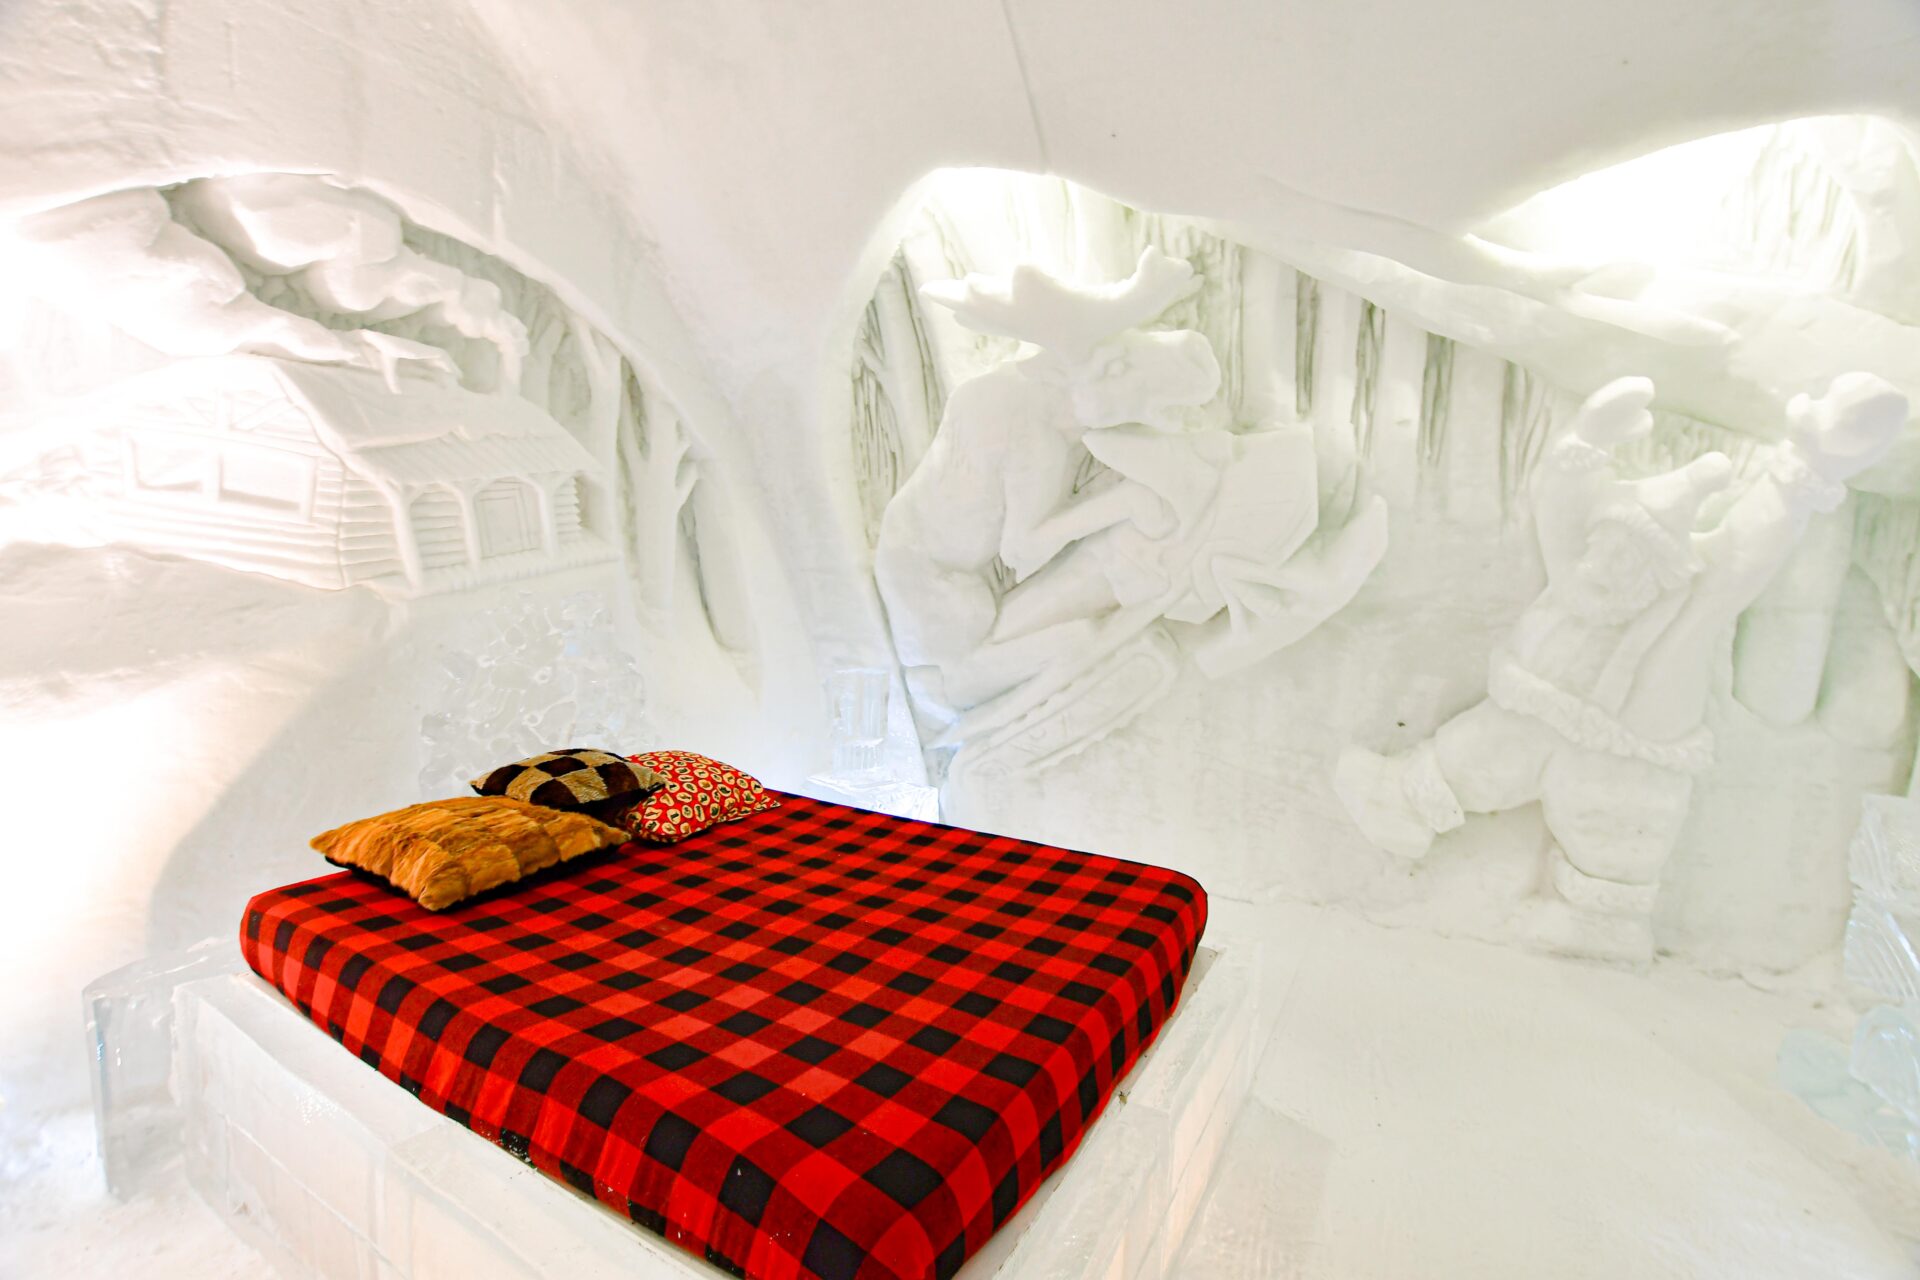 a themed room at Hôtel de Glace that depicts a log cabin, a moose riding a snowmobile and a nordic person